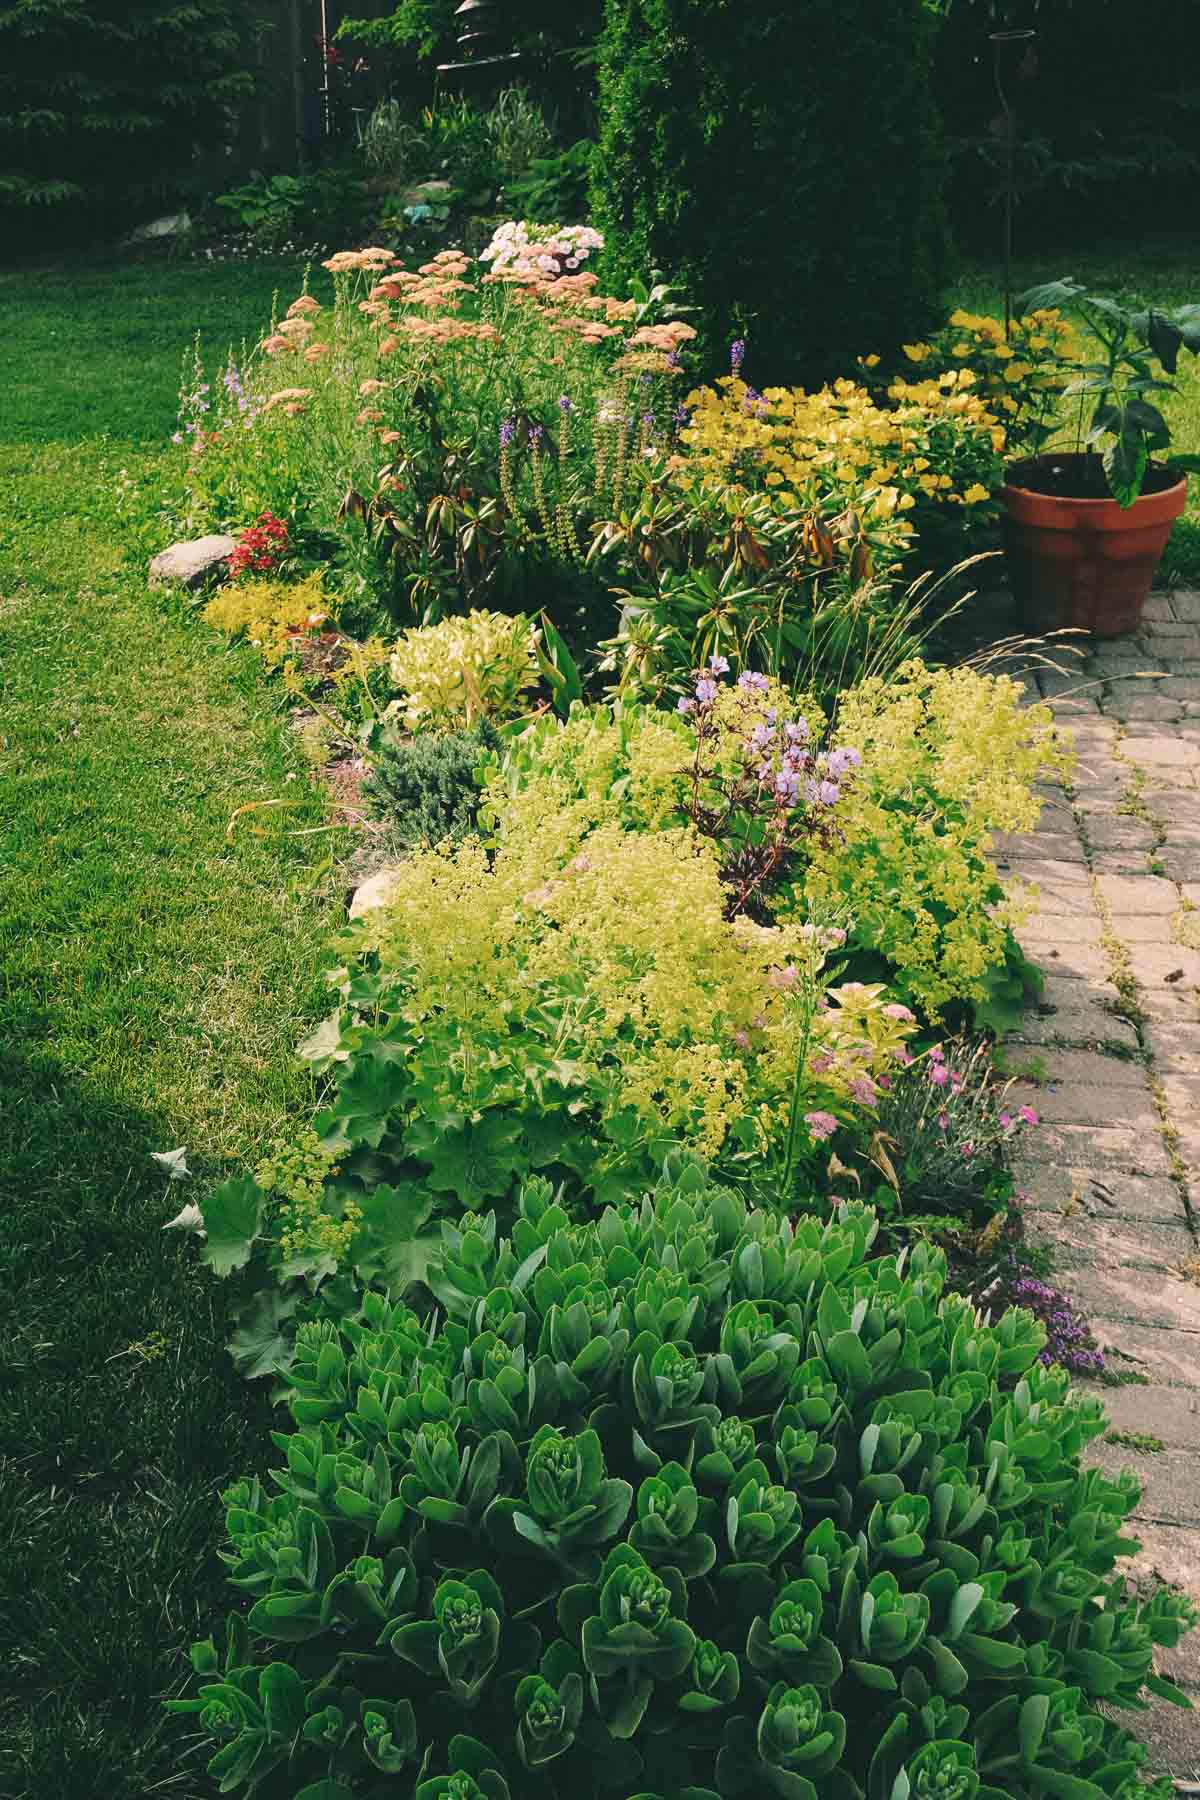 A mulched and edged flower bed of various annuals and perennials growing in the summer.